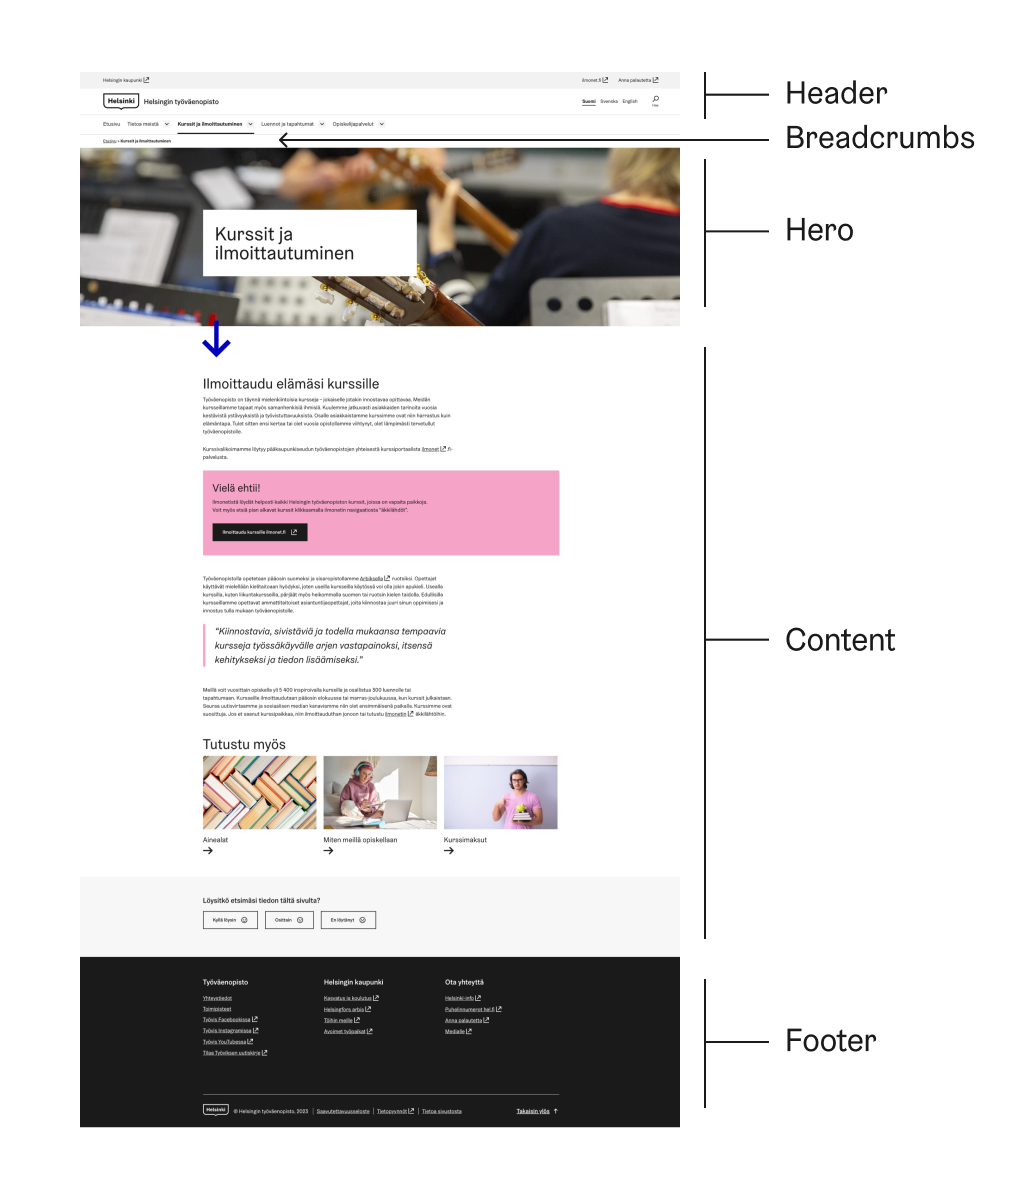 A screenshot of the Helsinki Finnish Adult Education Centre Website with medium number of navigation elements: Header, Breadcrumbs, Main content and Footer.